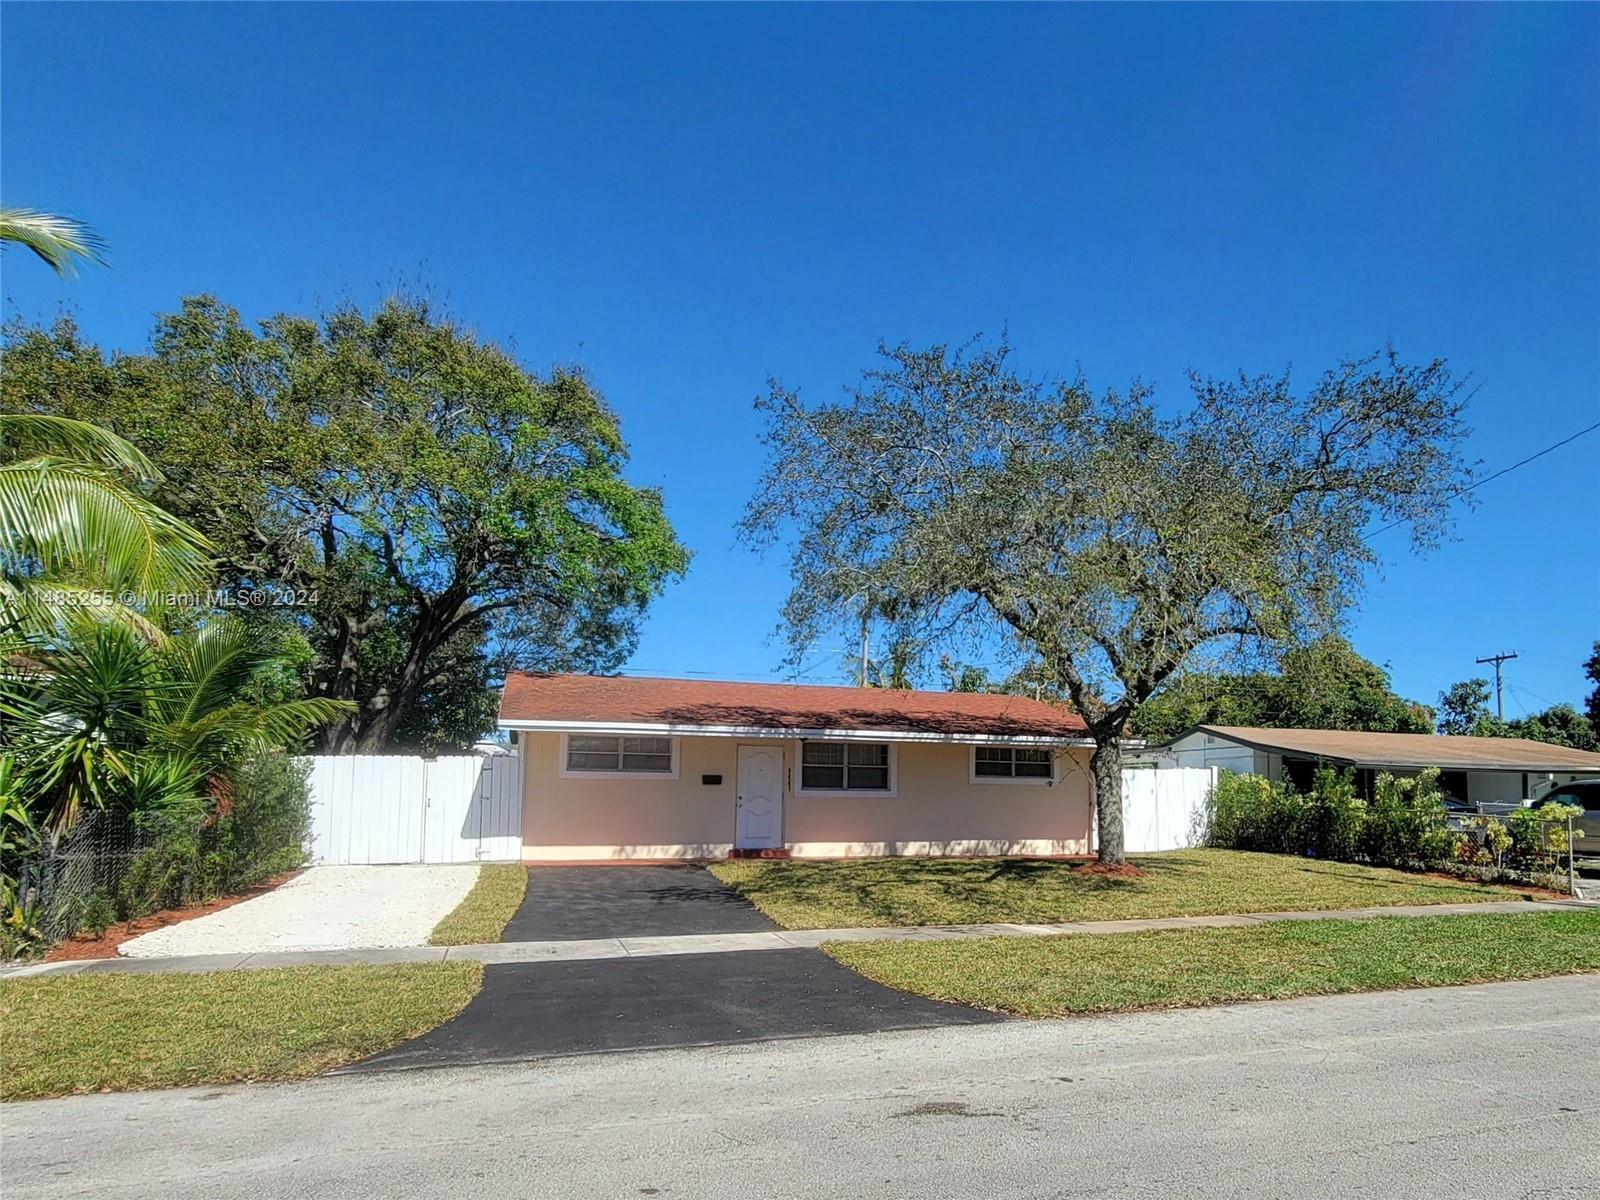 Photo of 6441 Allen St in Hollywood, FL